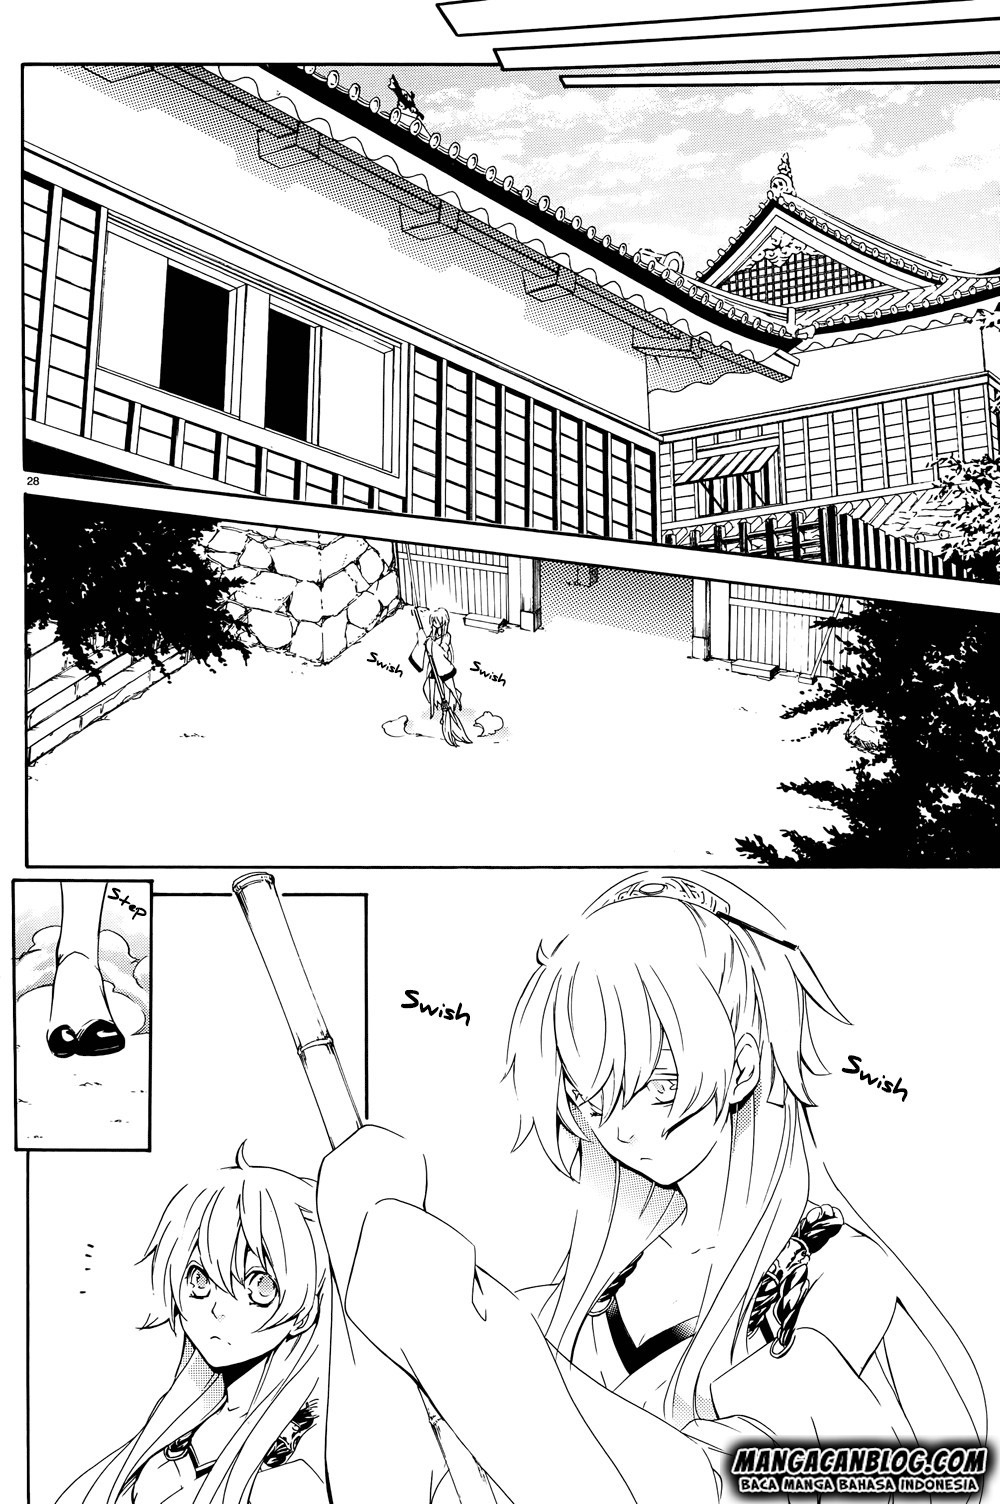 Brave 10 S Chapter 19